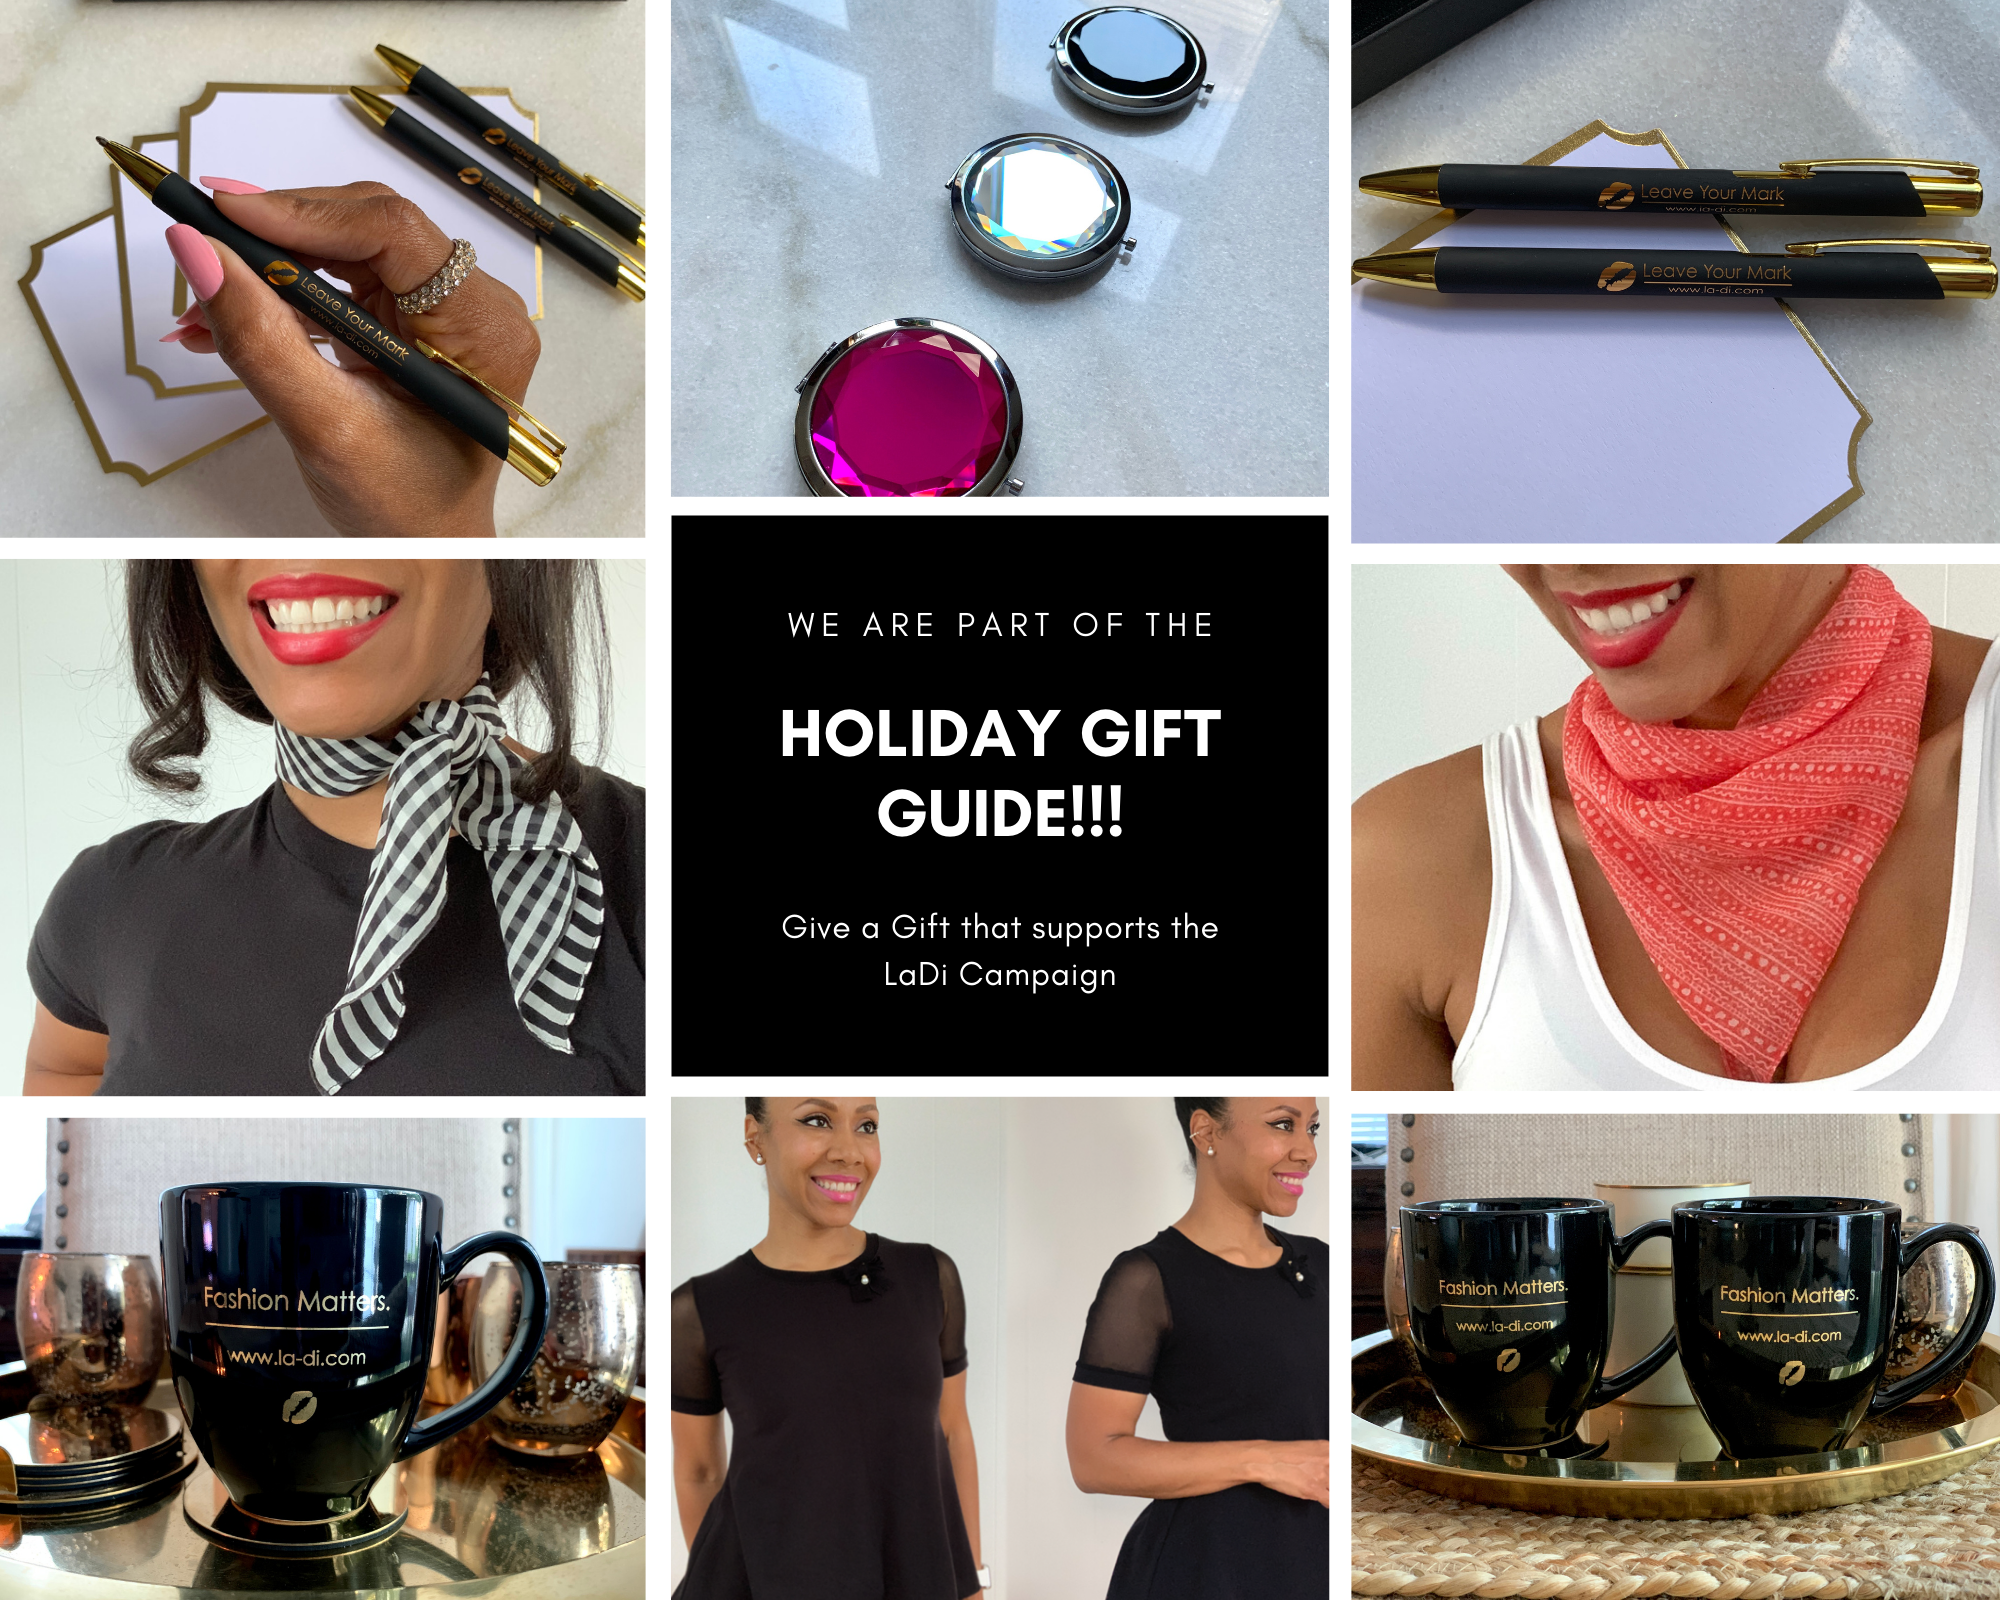 Holiday Gift Guide 2021, Best Gifts of 2021, Best Gifts for Women, 6 Small gifts for the woman who has everything